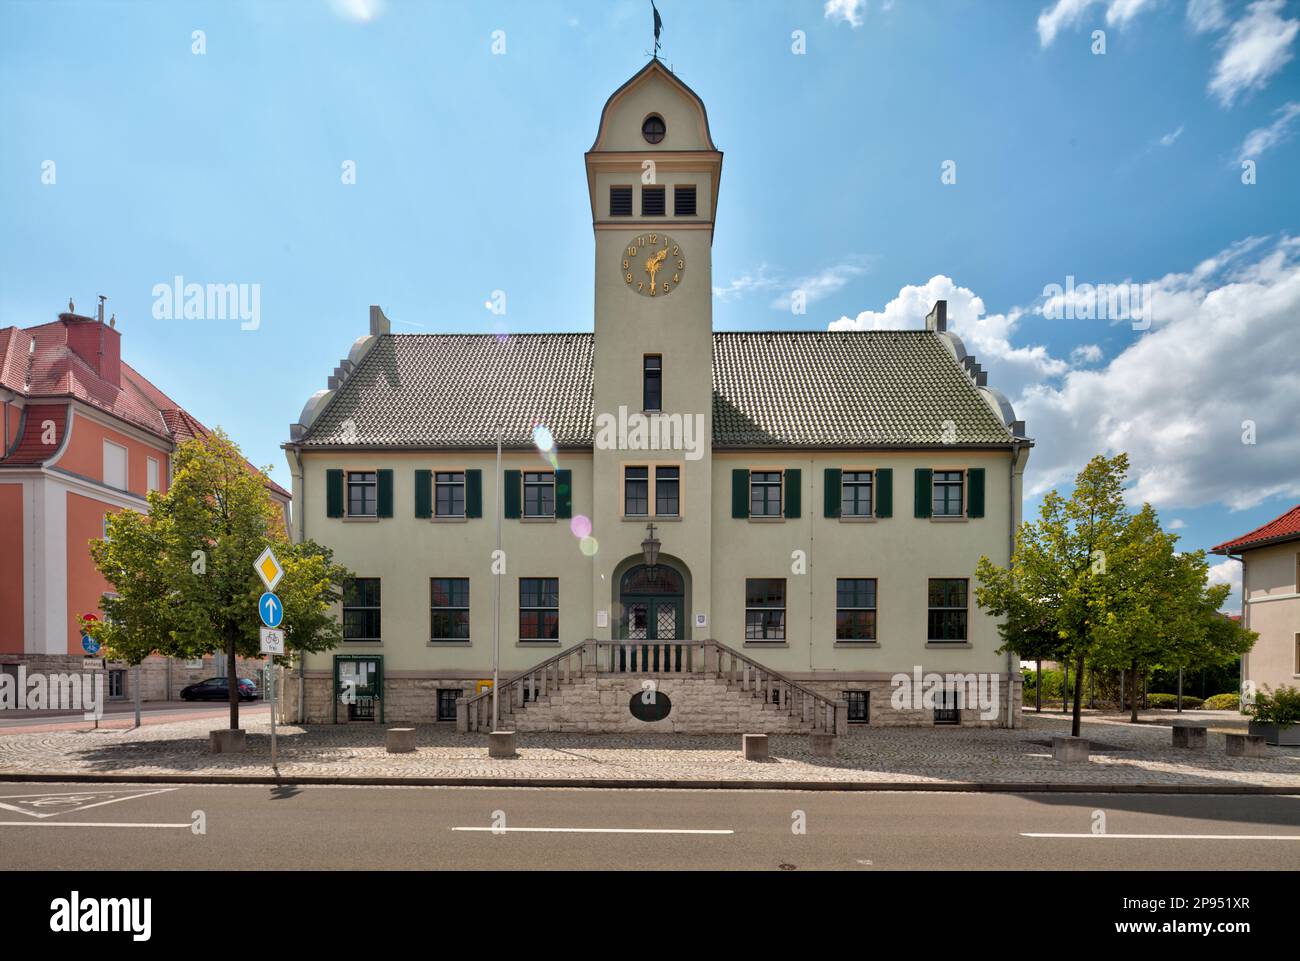 Town hall, administration, house facade, historical, Breitungen, Werra, Thuringia, Germany, Stock Photo